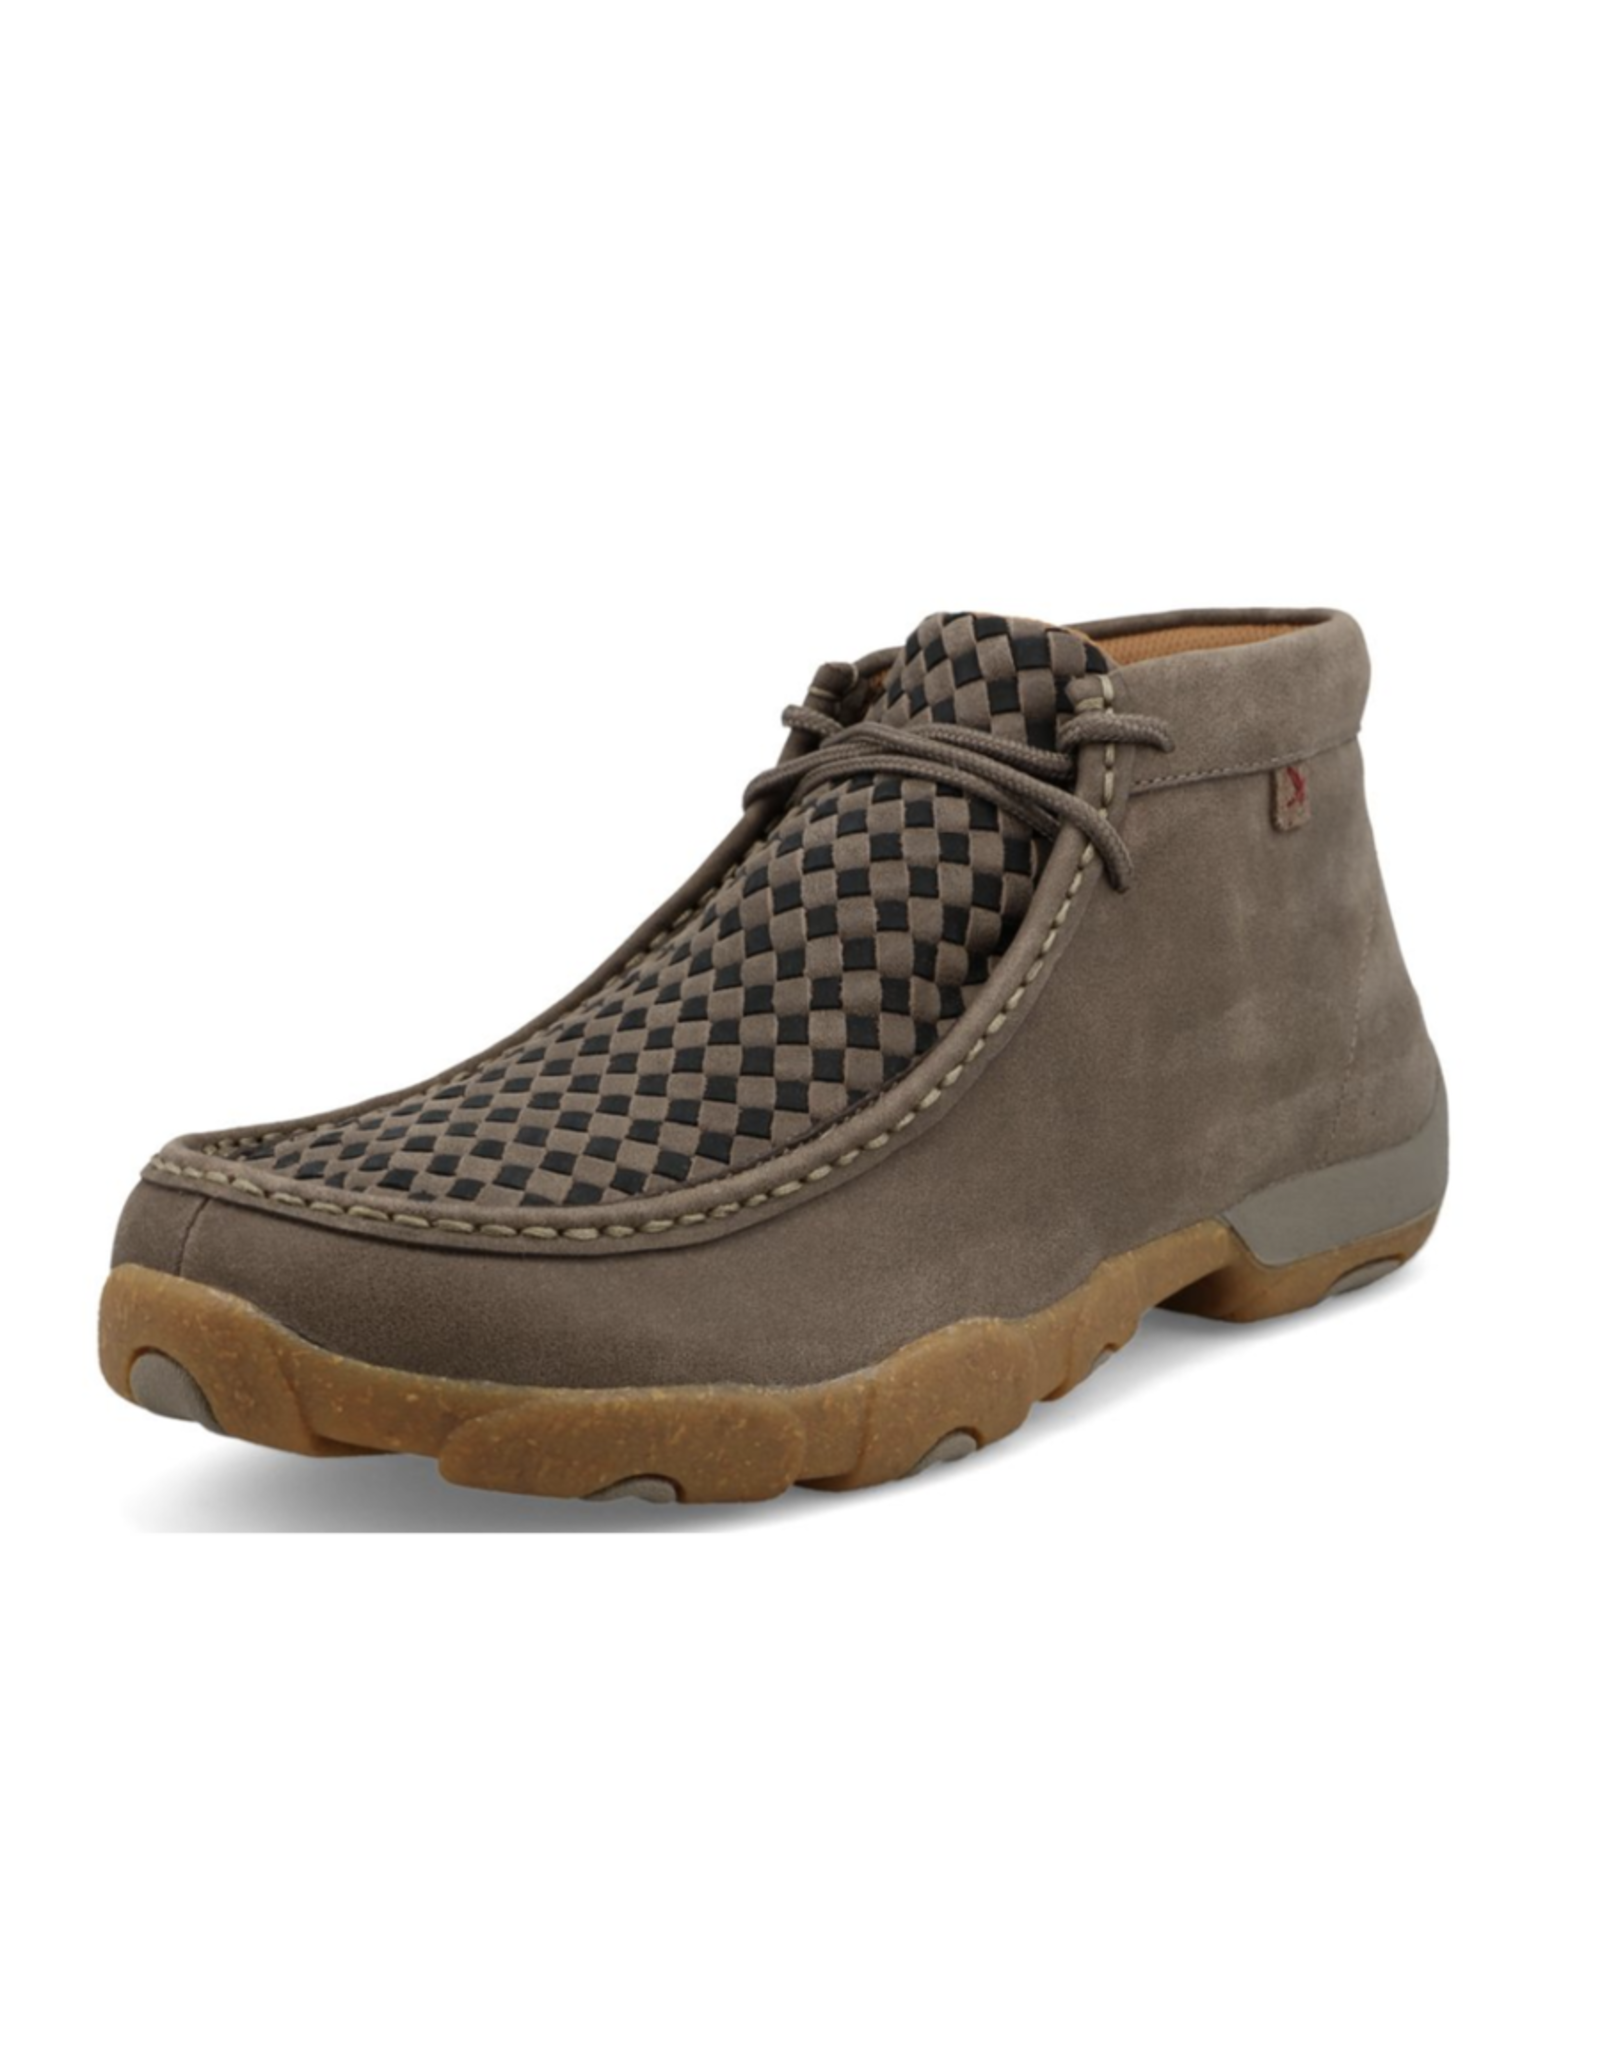 Twisted X Men's Taupe/Grey & Black Basket Woven MDM0097 Driving Moc